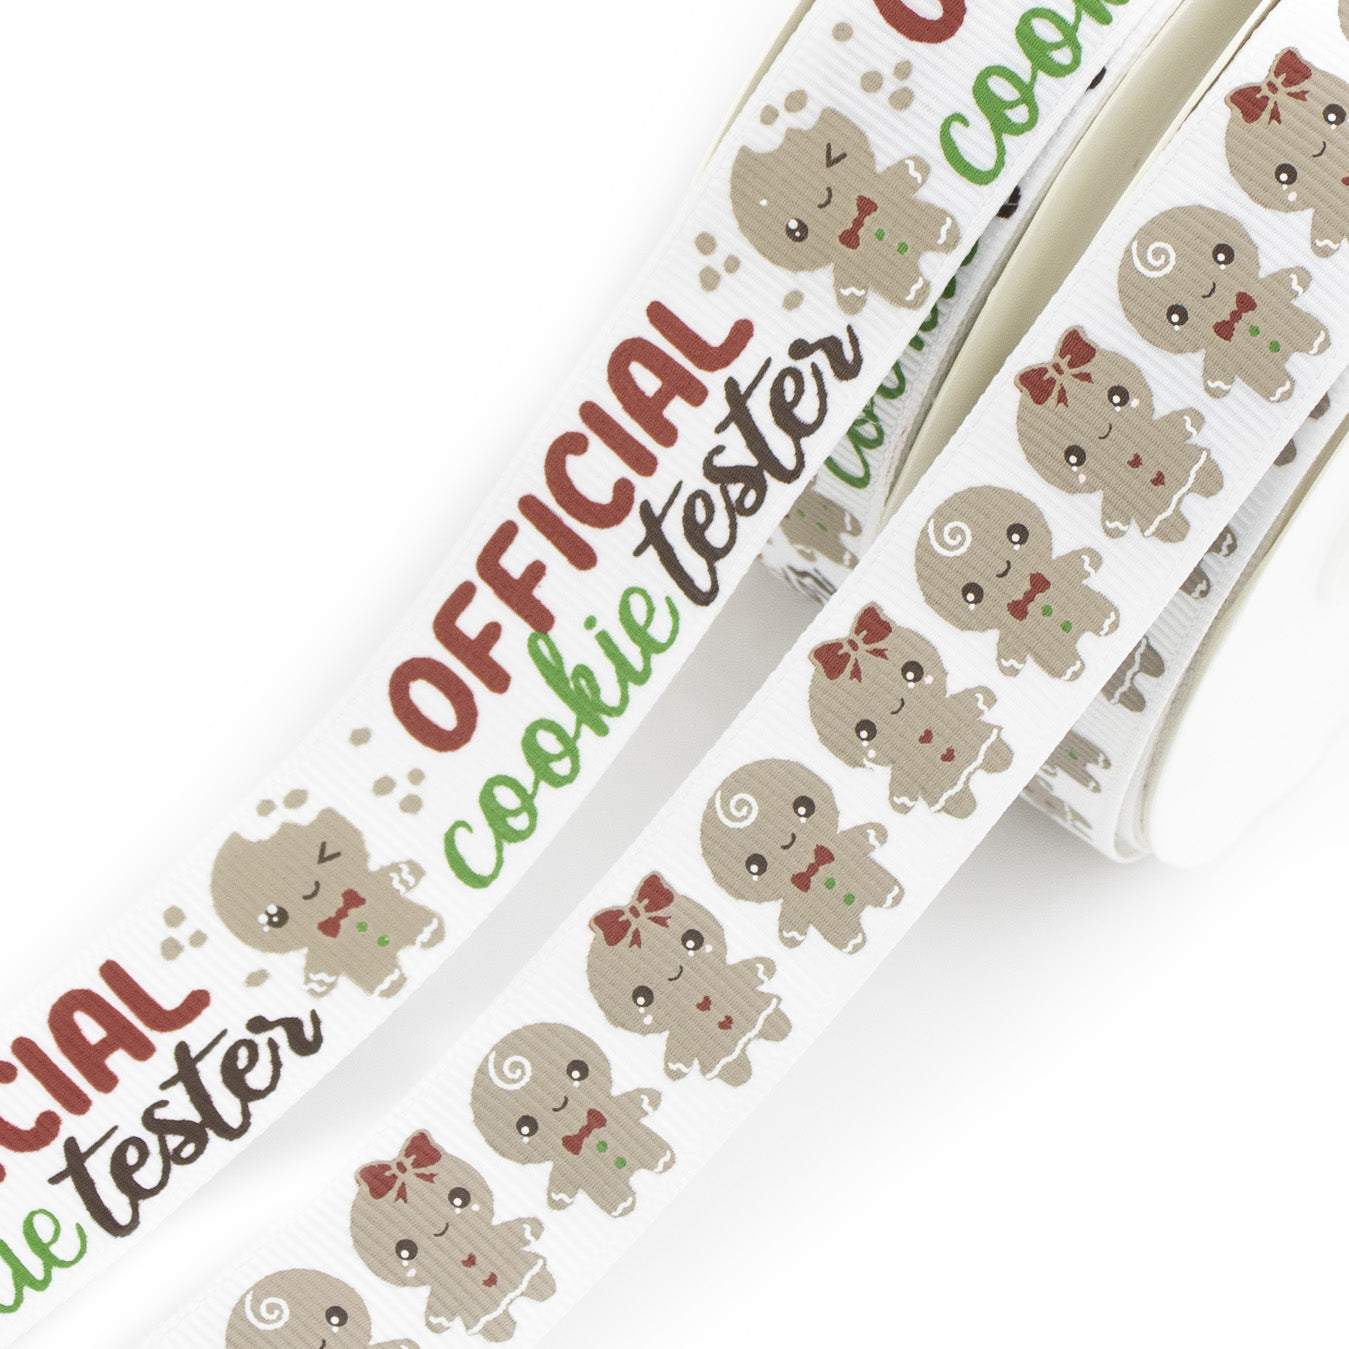 Official Cookie Tester Grosgrain Ribbon